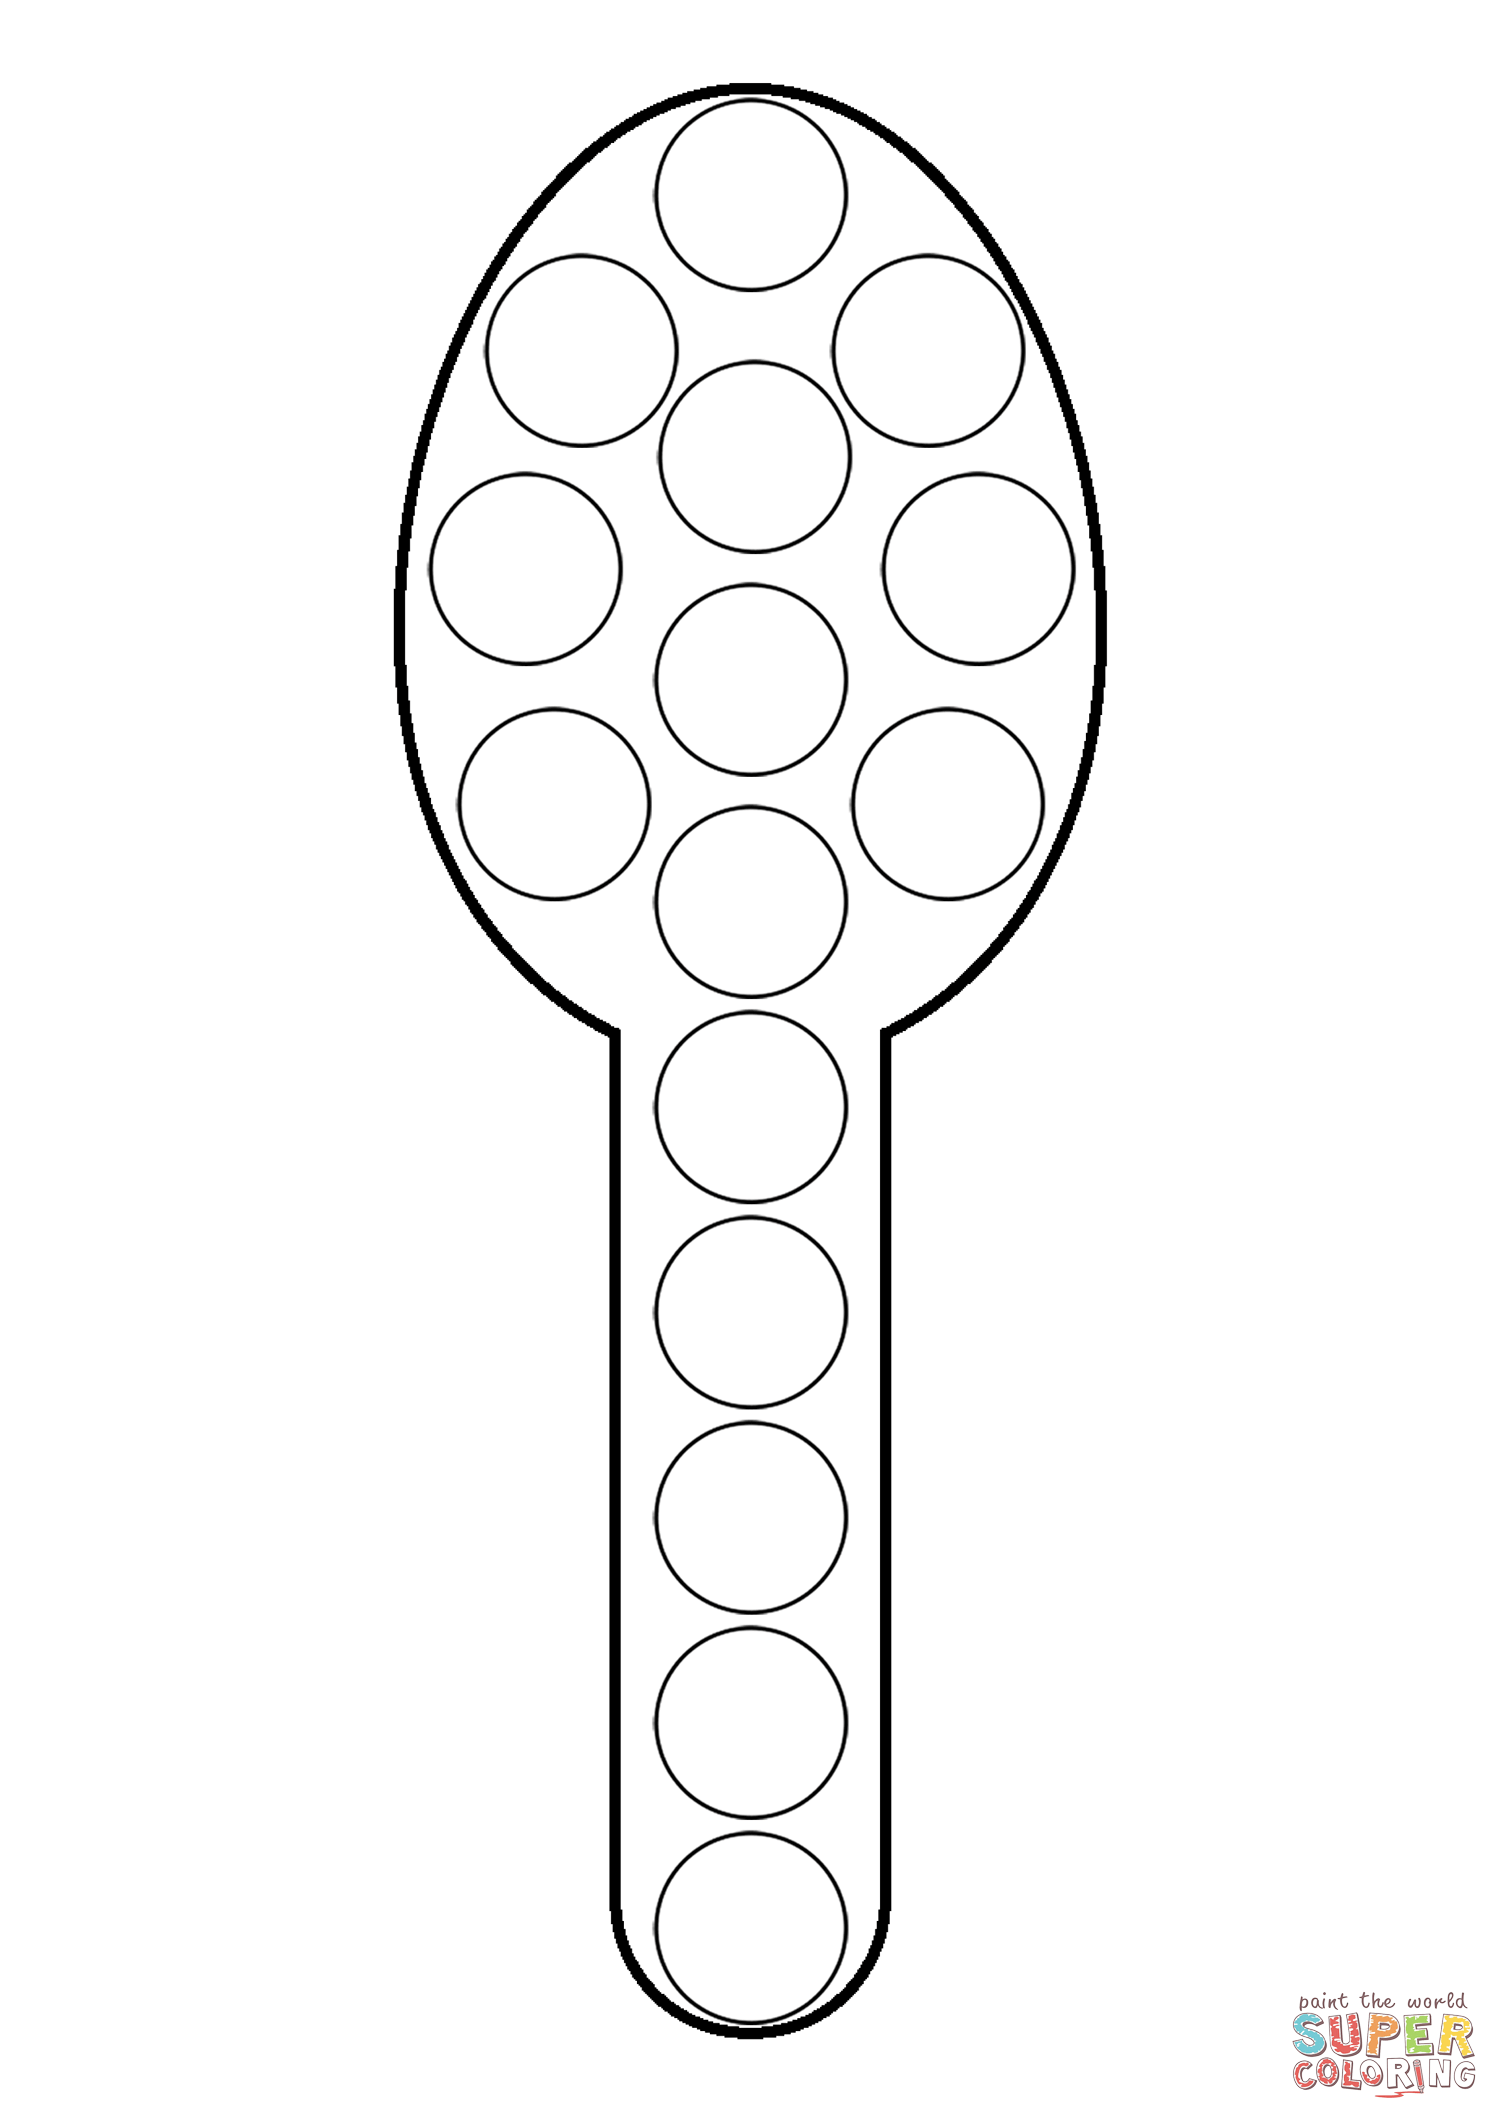 Spoon dot art coloring page free printable coloring pages